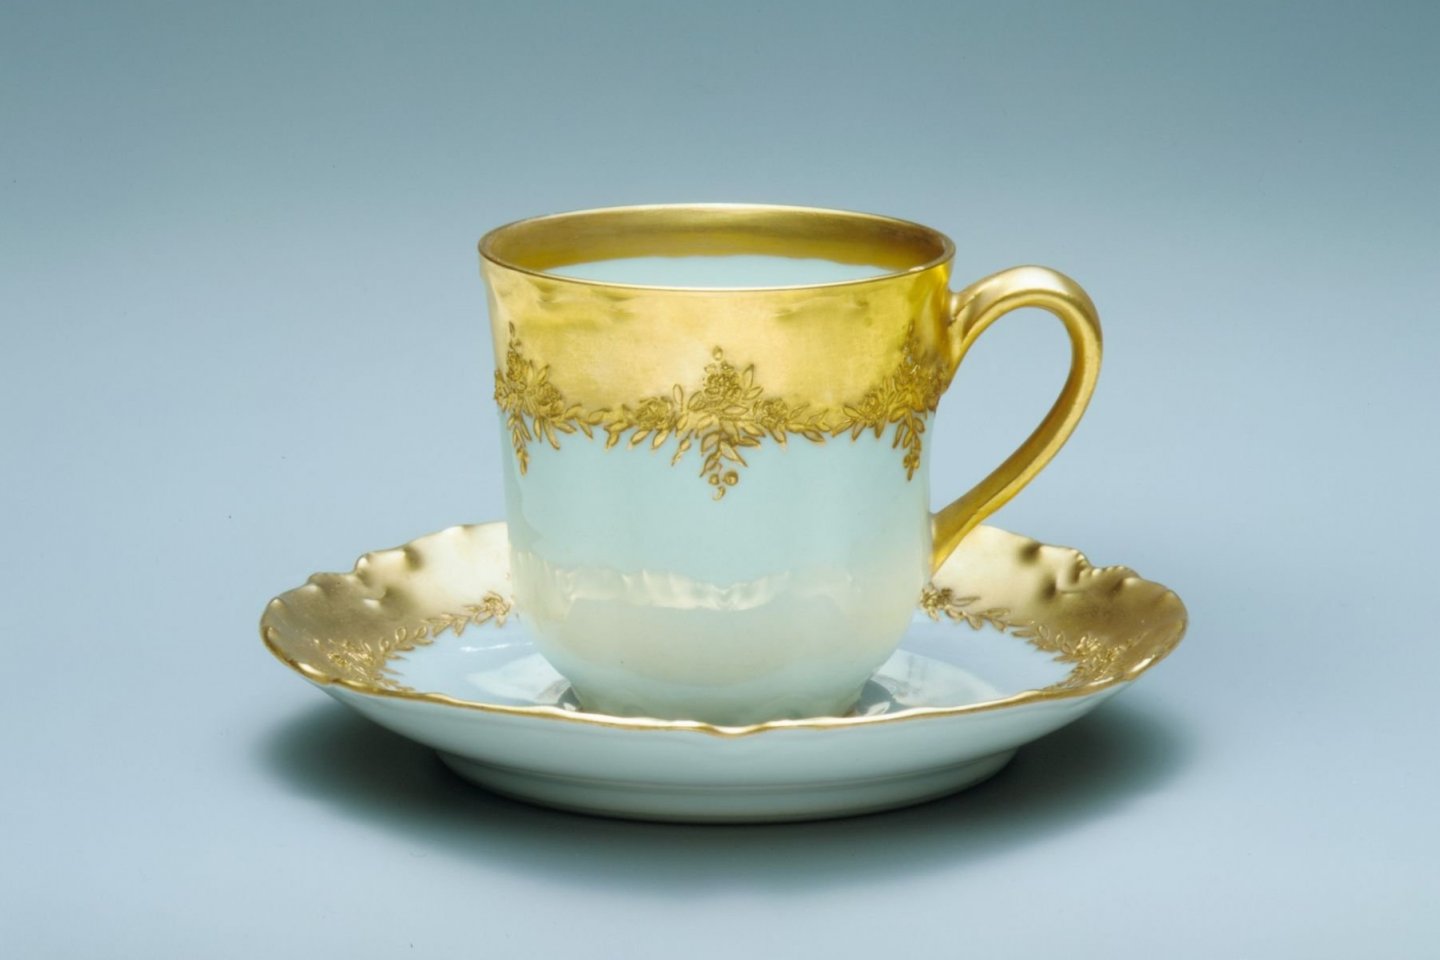 This exhibition will explore a range of demitasse cups